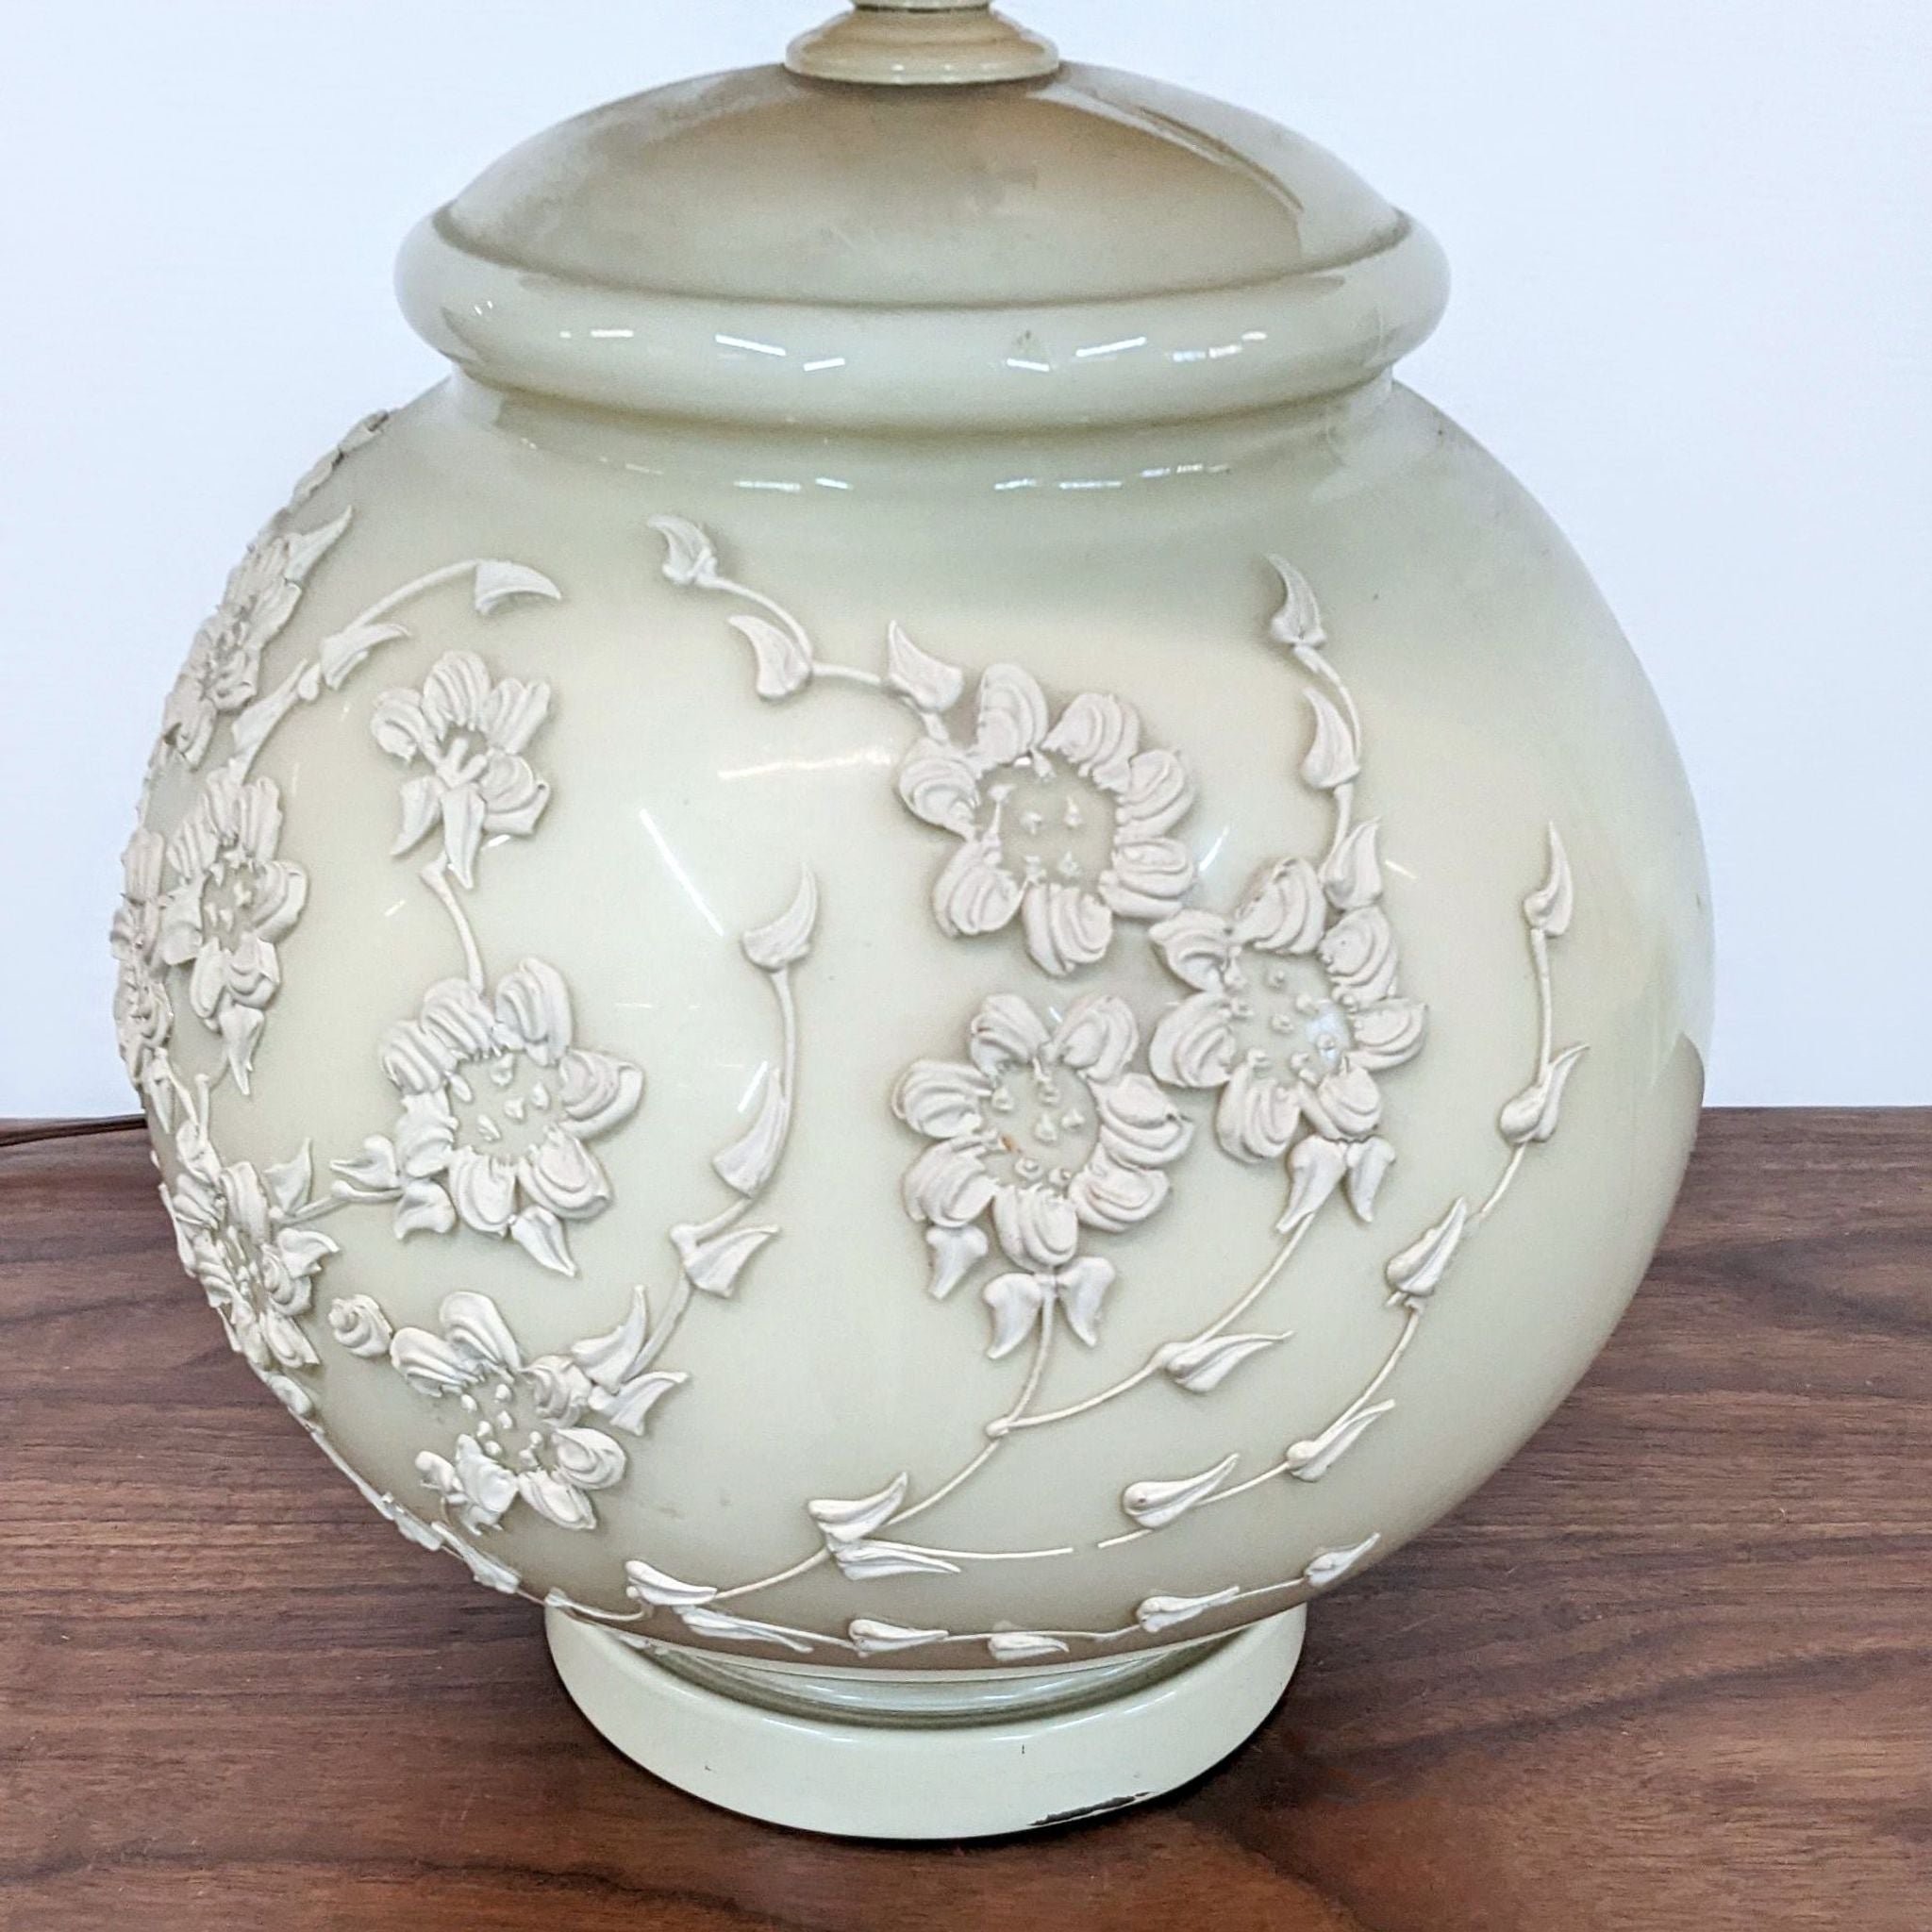 Reperch brand round ceramic lighting base with embossed floral design, showcased on a wooden surface.